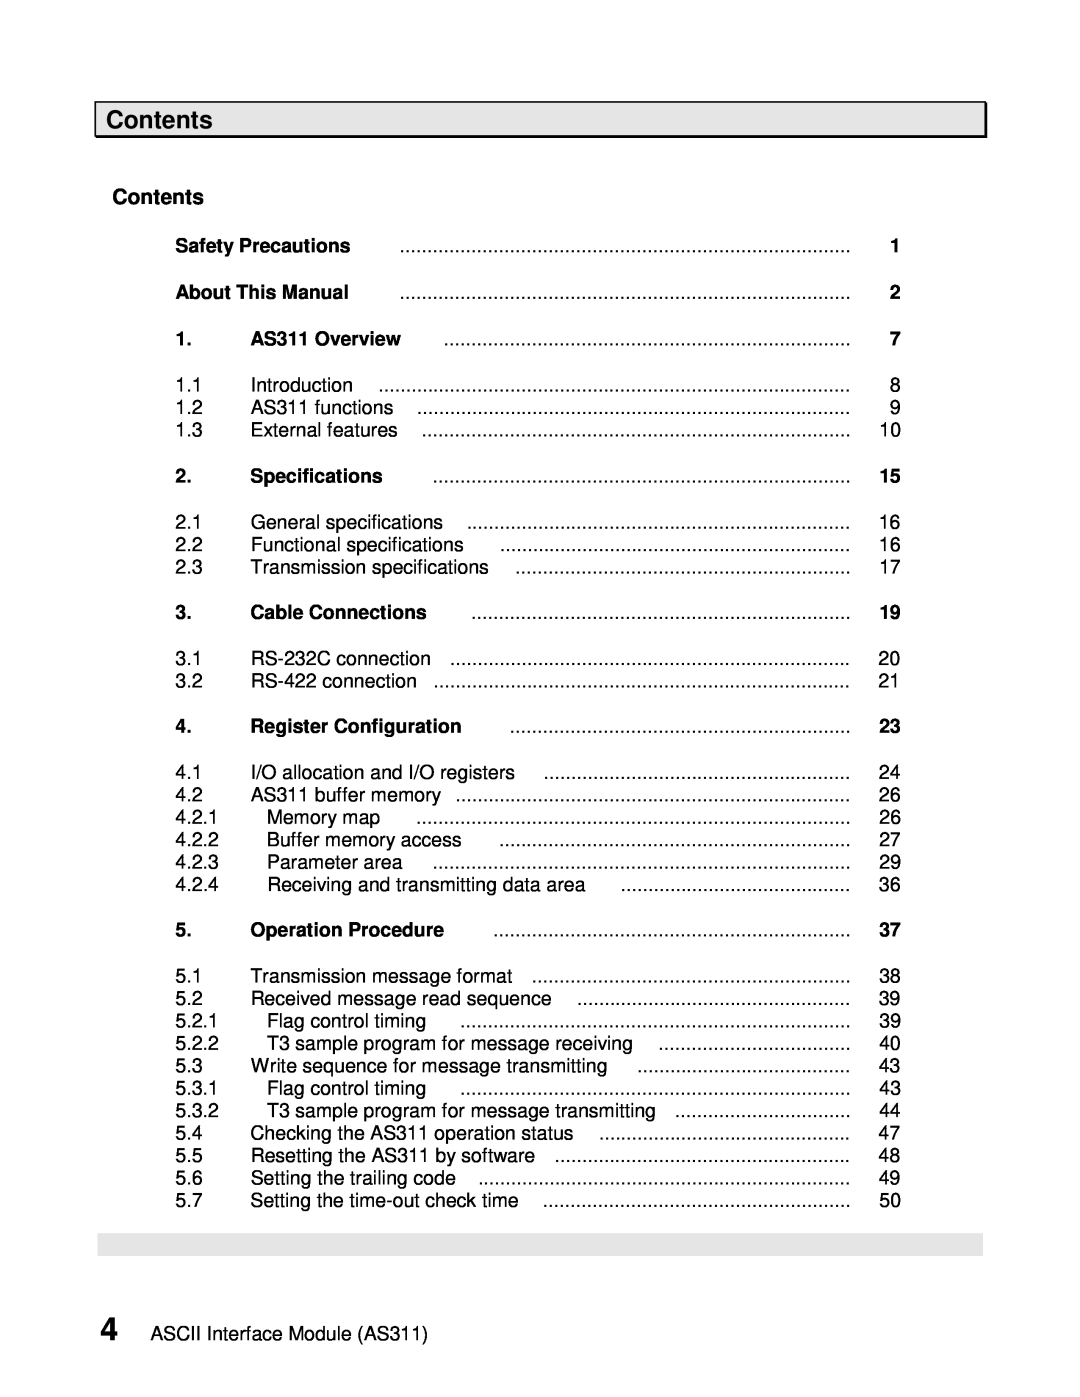 Toshiba AS311 user manual Contents 